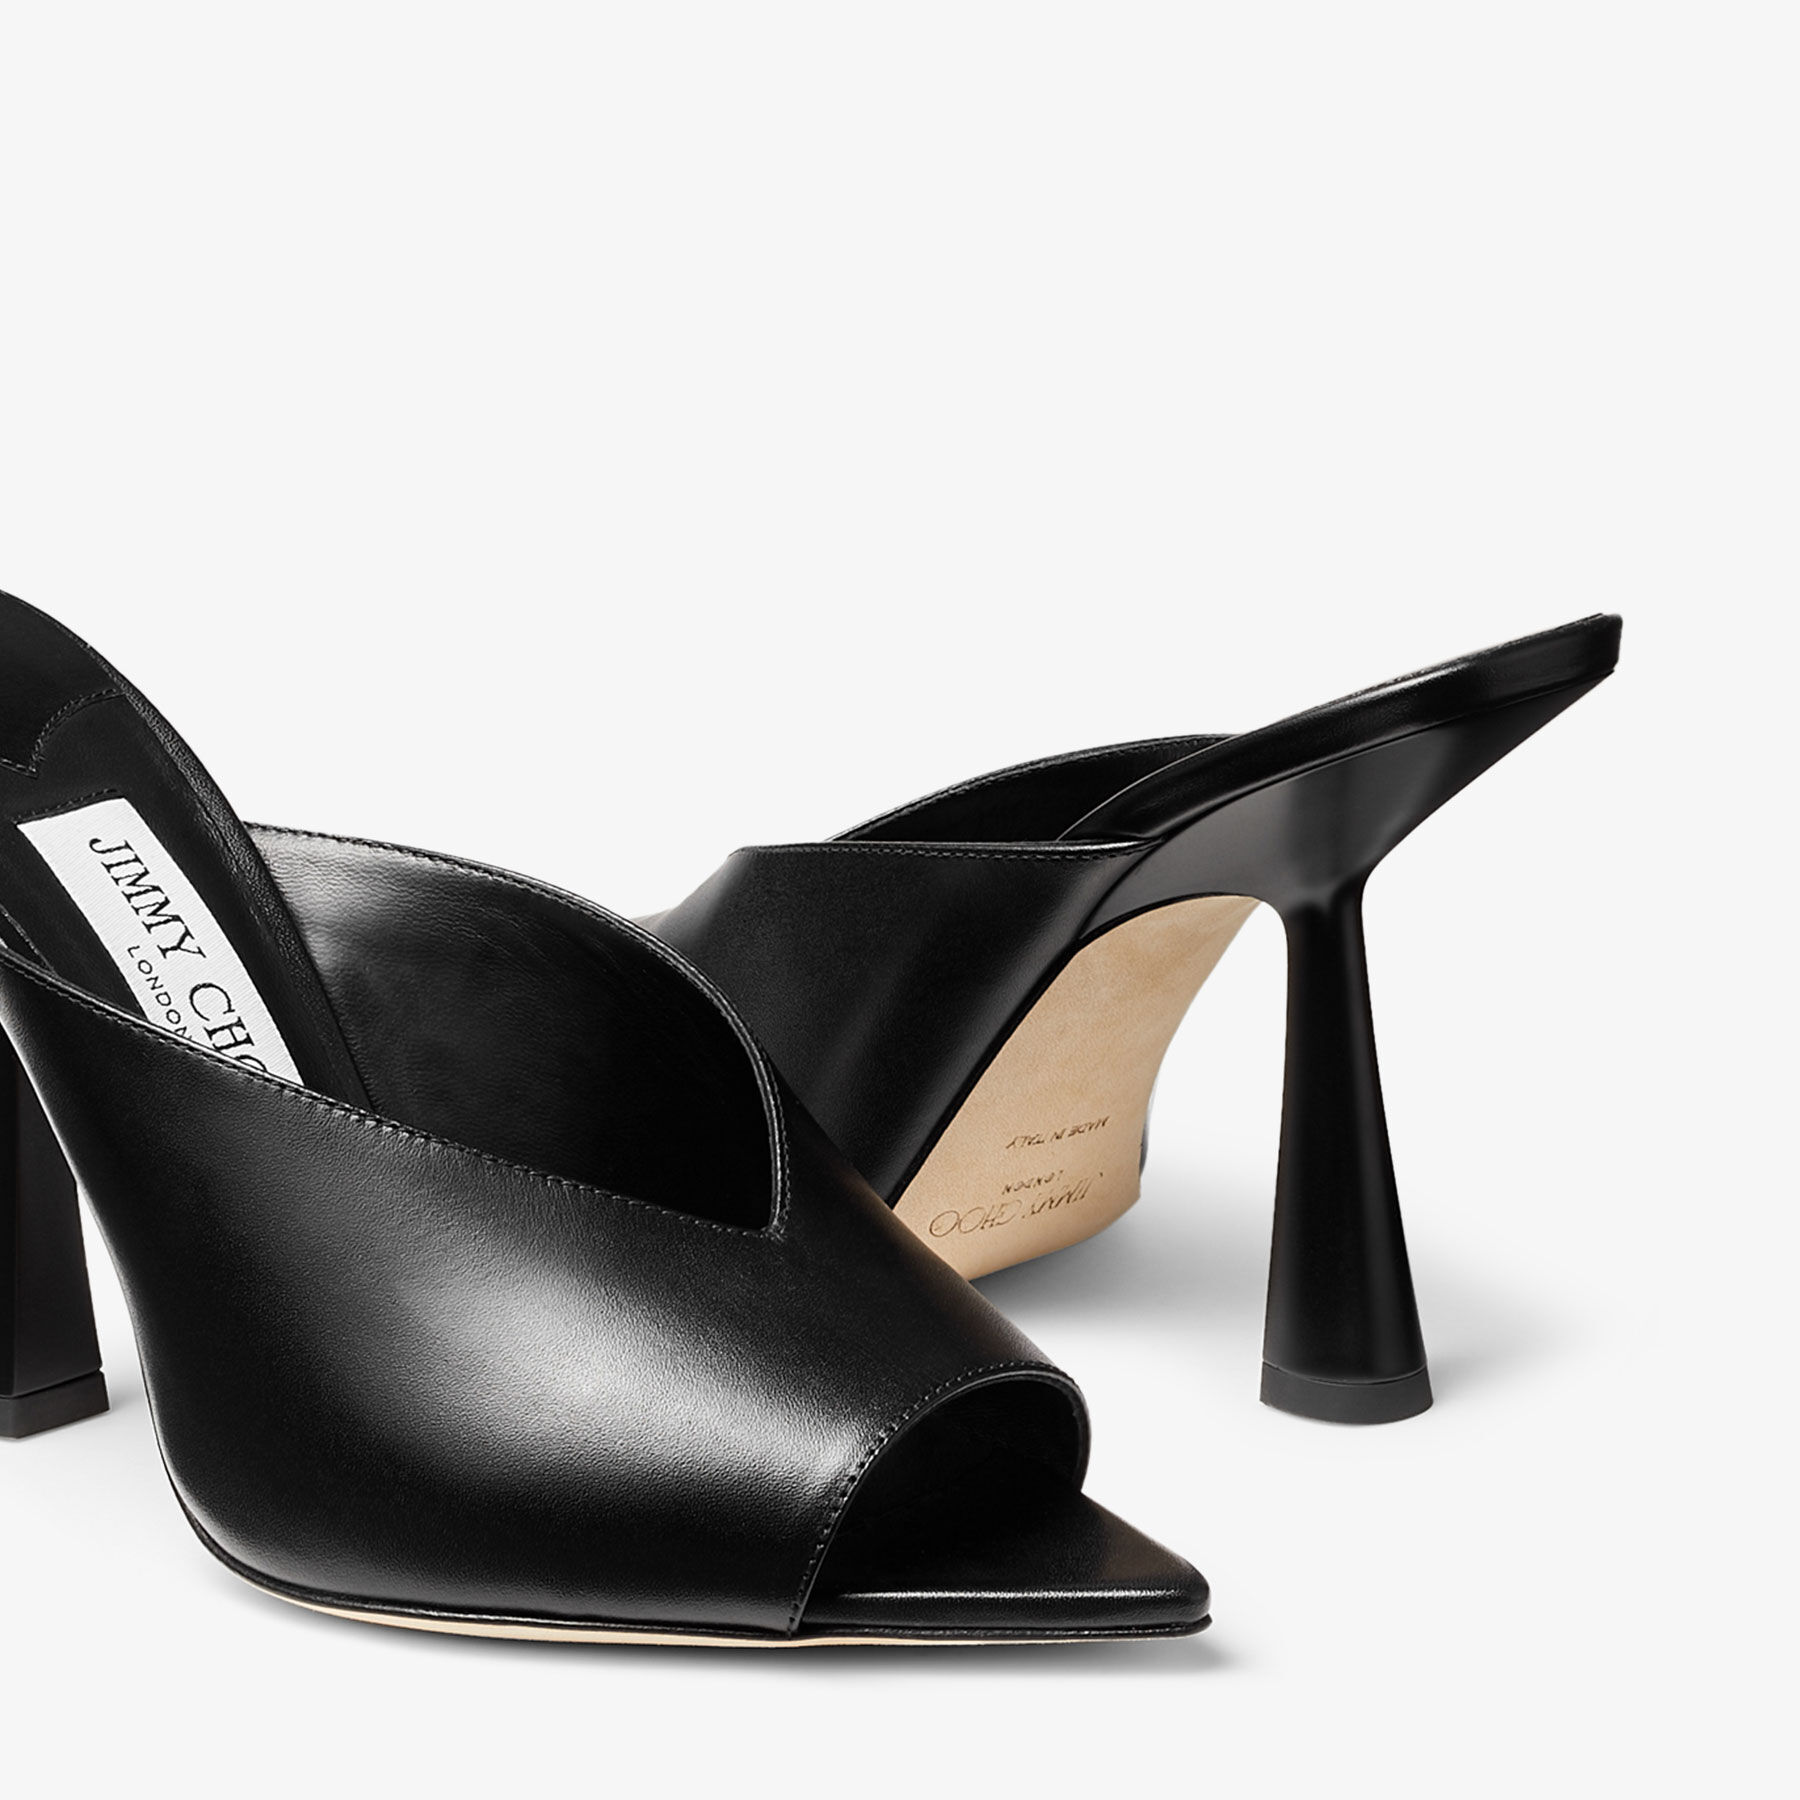 MARYANNE MULE 100 | Black Calf Leather Pointed-Toe Mules | Autumn 